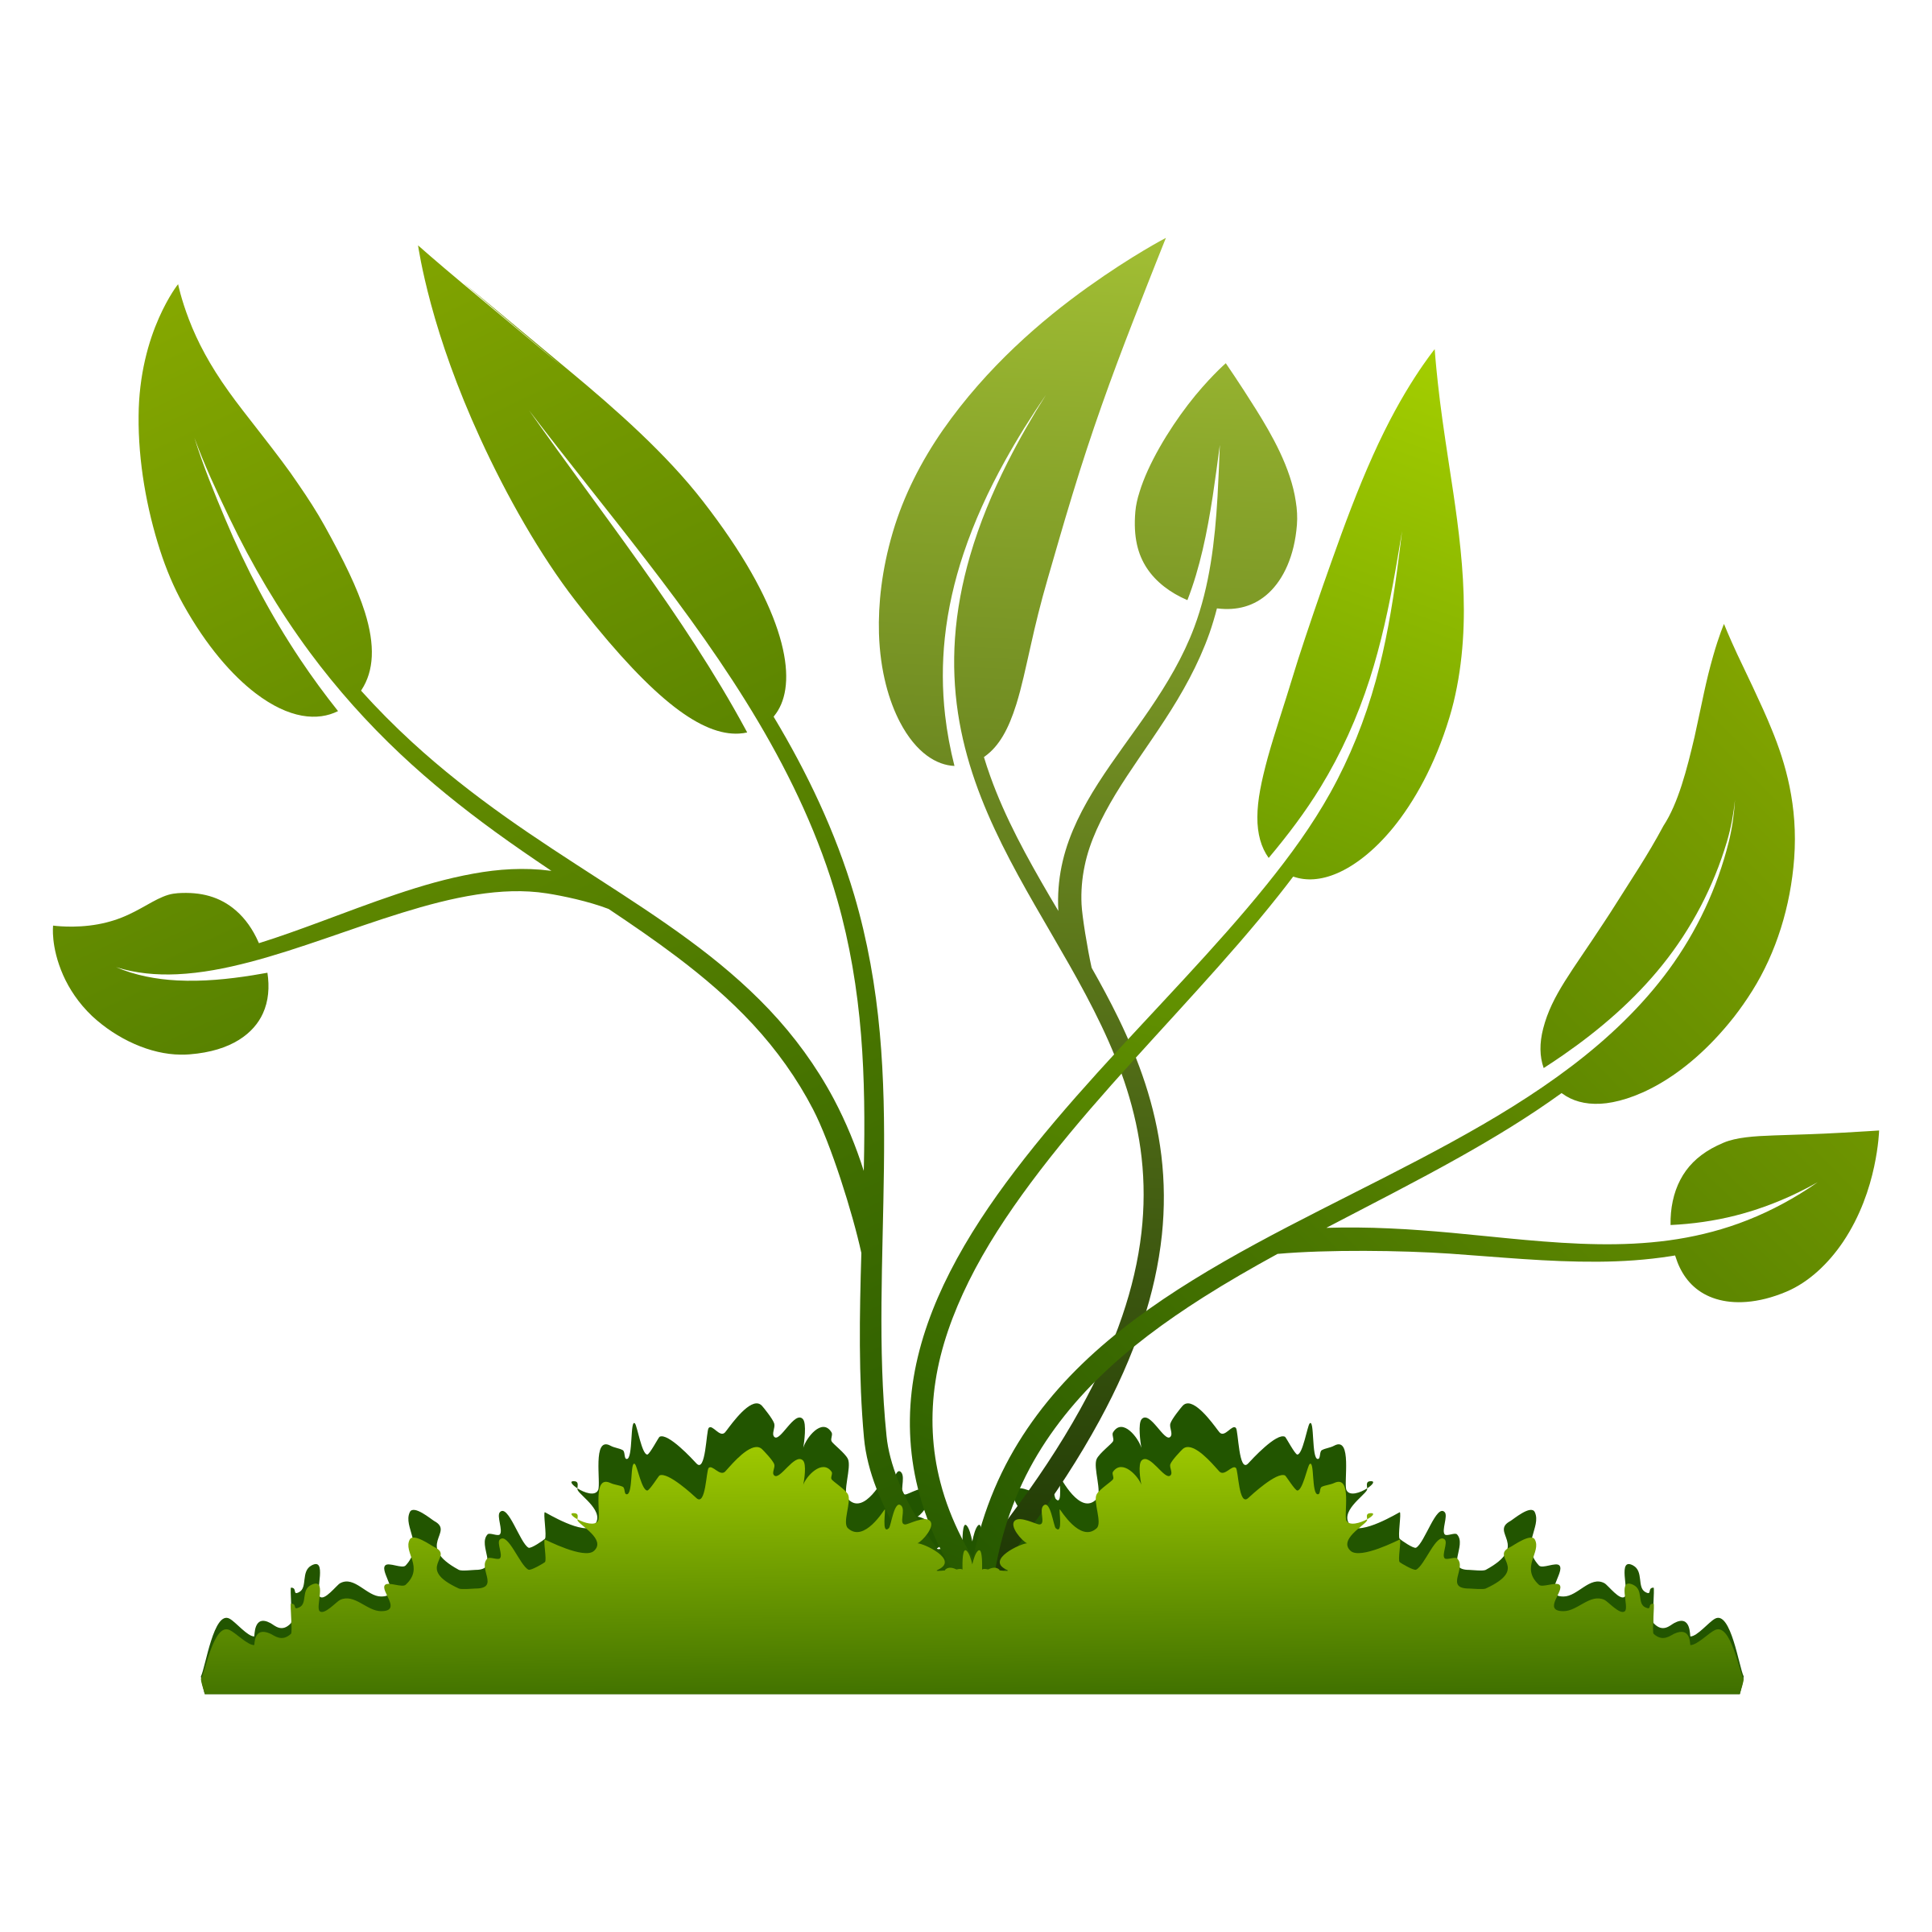 Plants growing out of the Ground vector clipart image ...